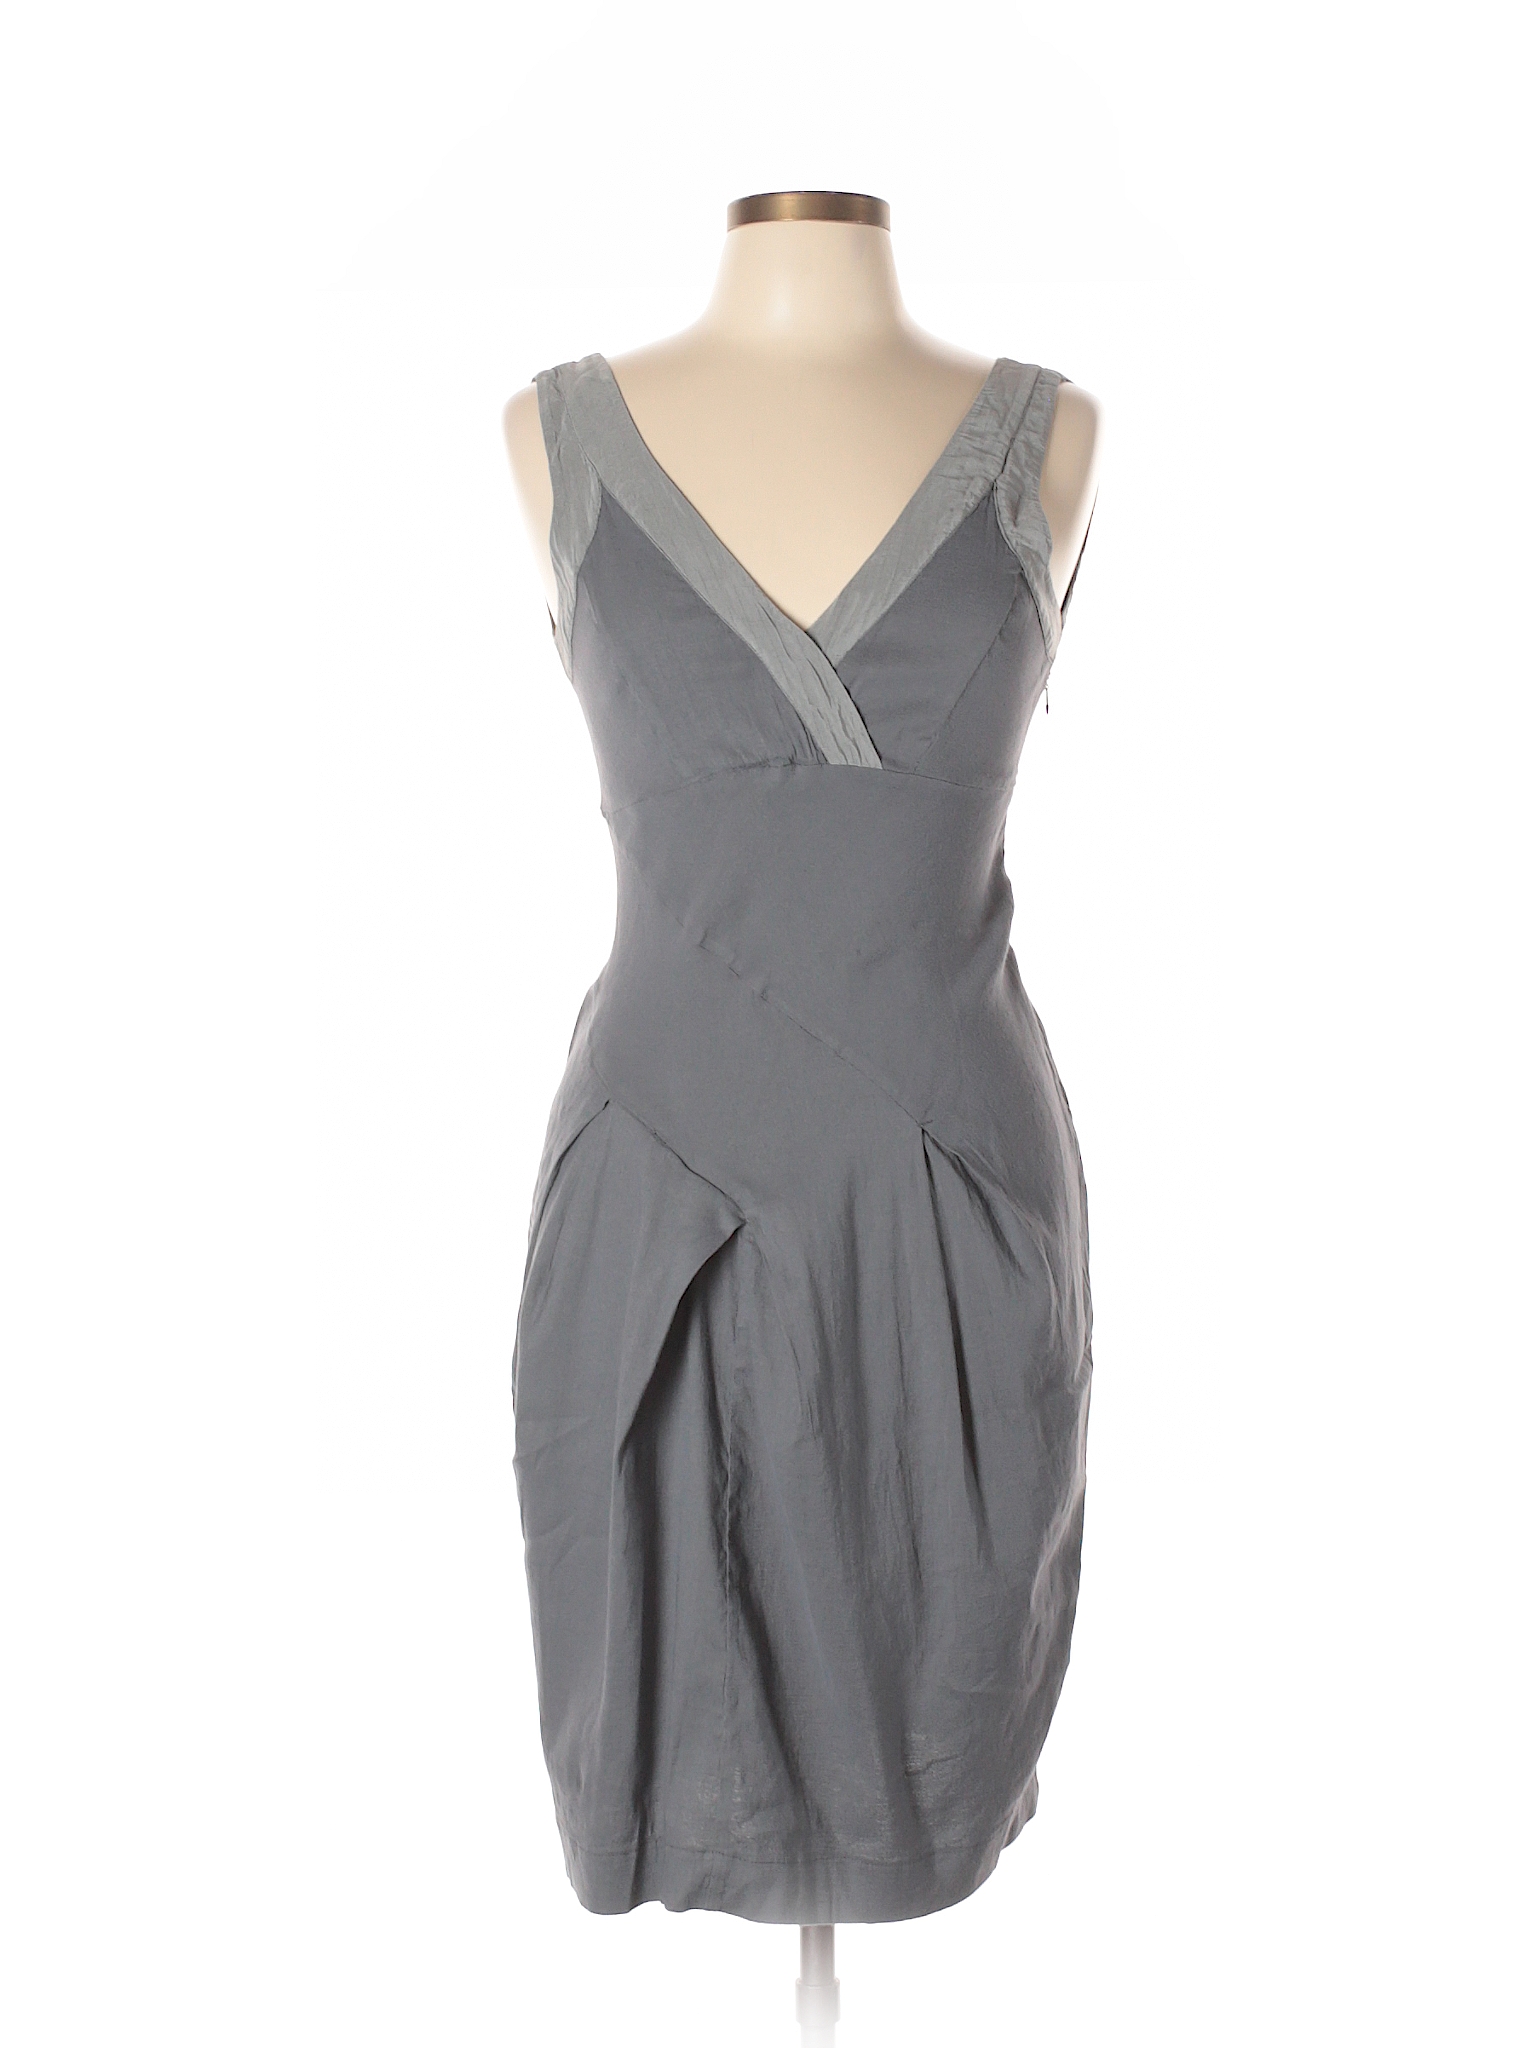 Transit Par-Such Solid Gray Casual Dress Size Lg (III or 3) - 78% off ...